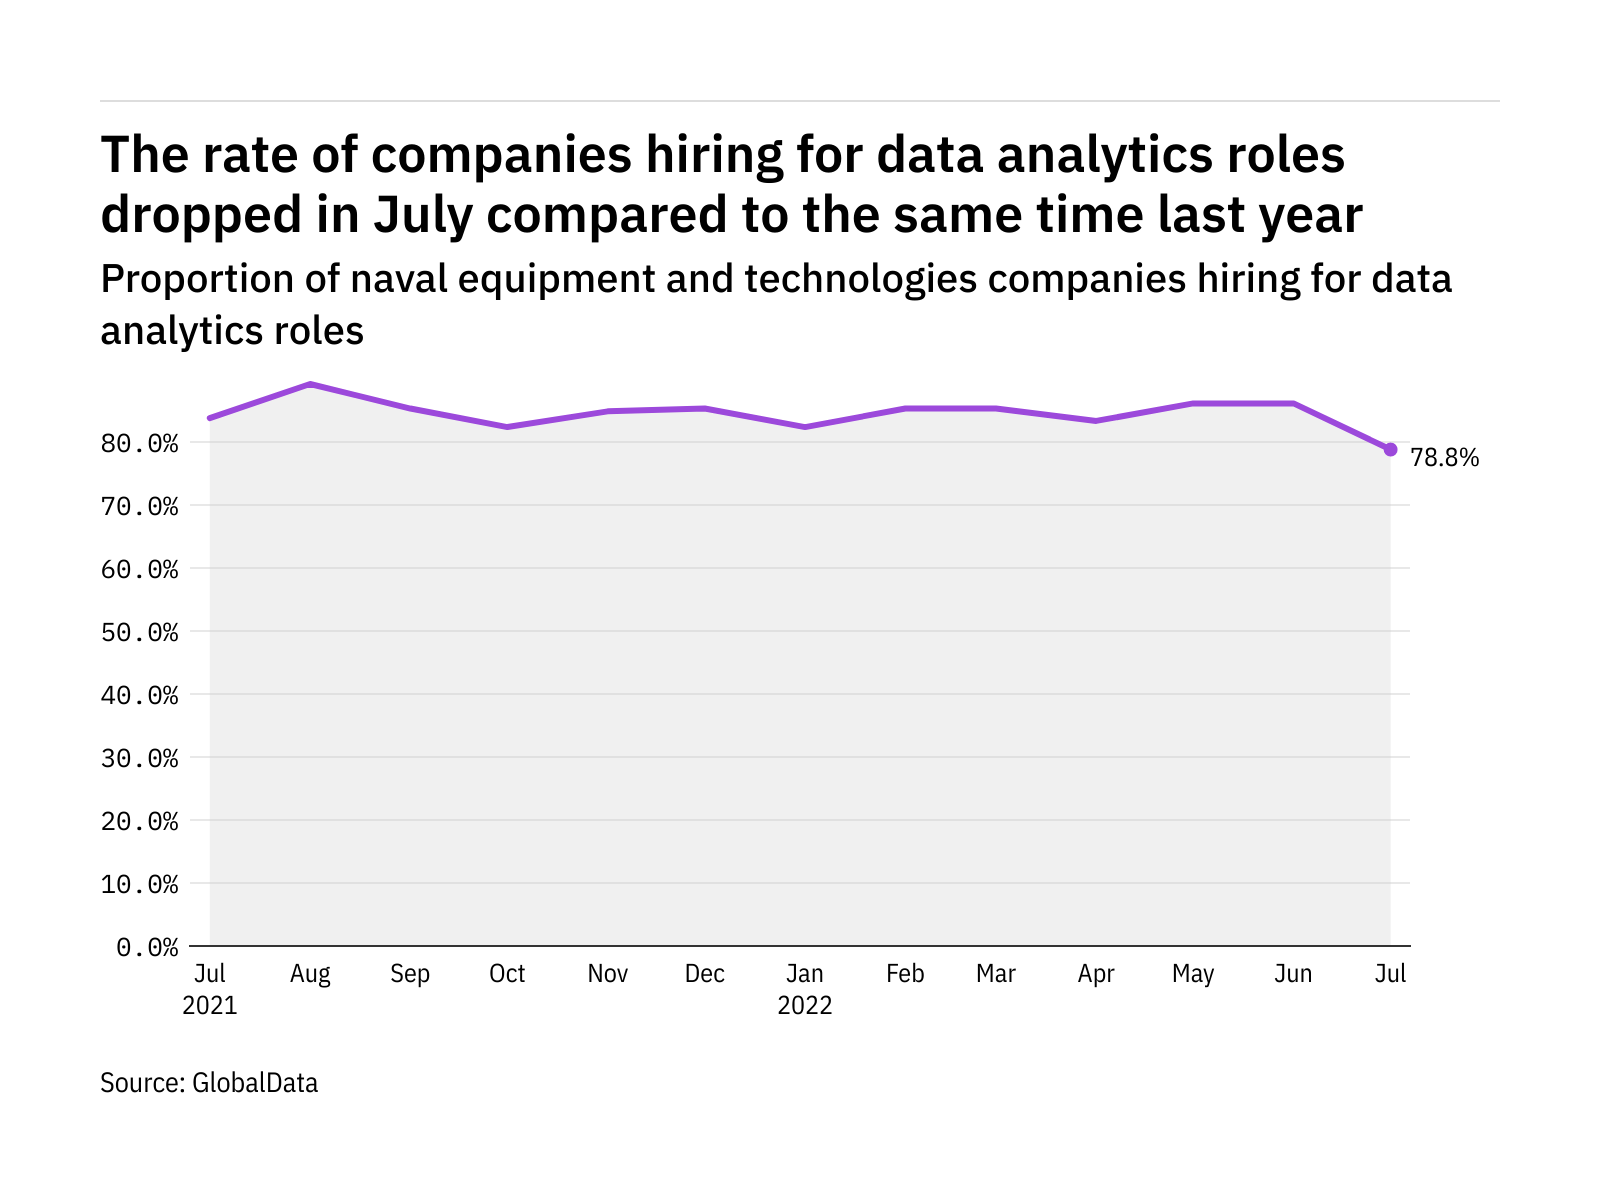 Data analytics hiring levels in the naval industry fell to a year-low in July 2022